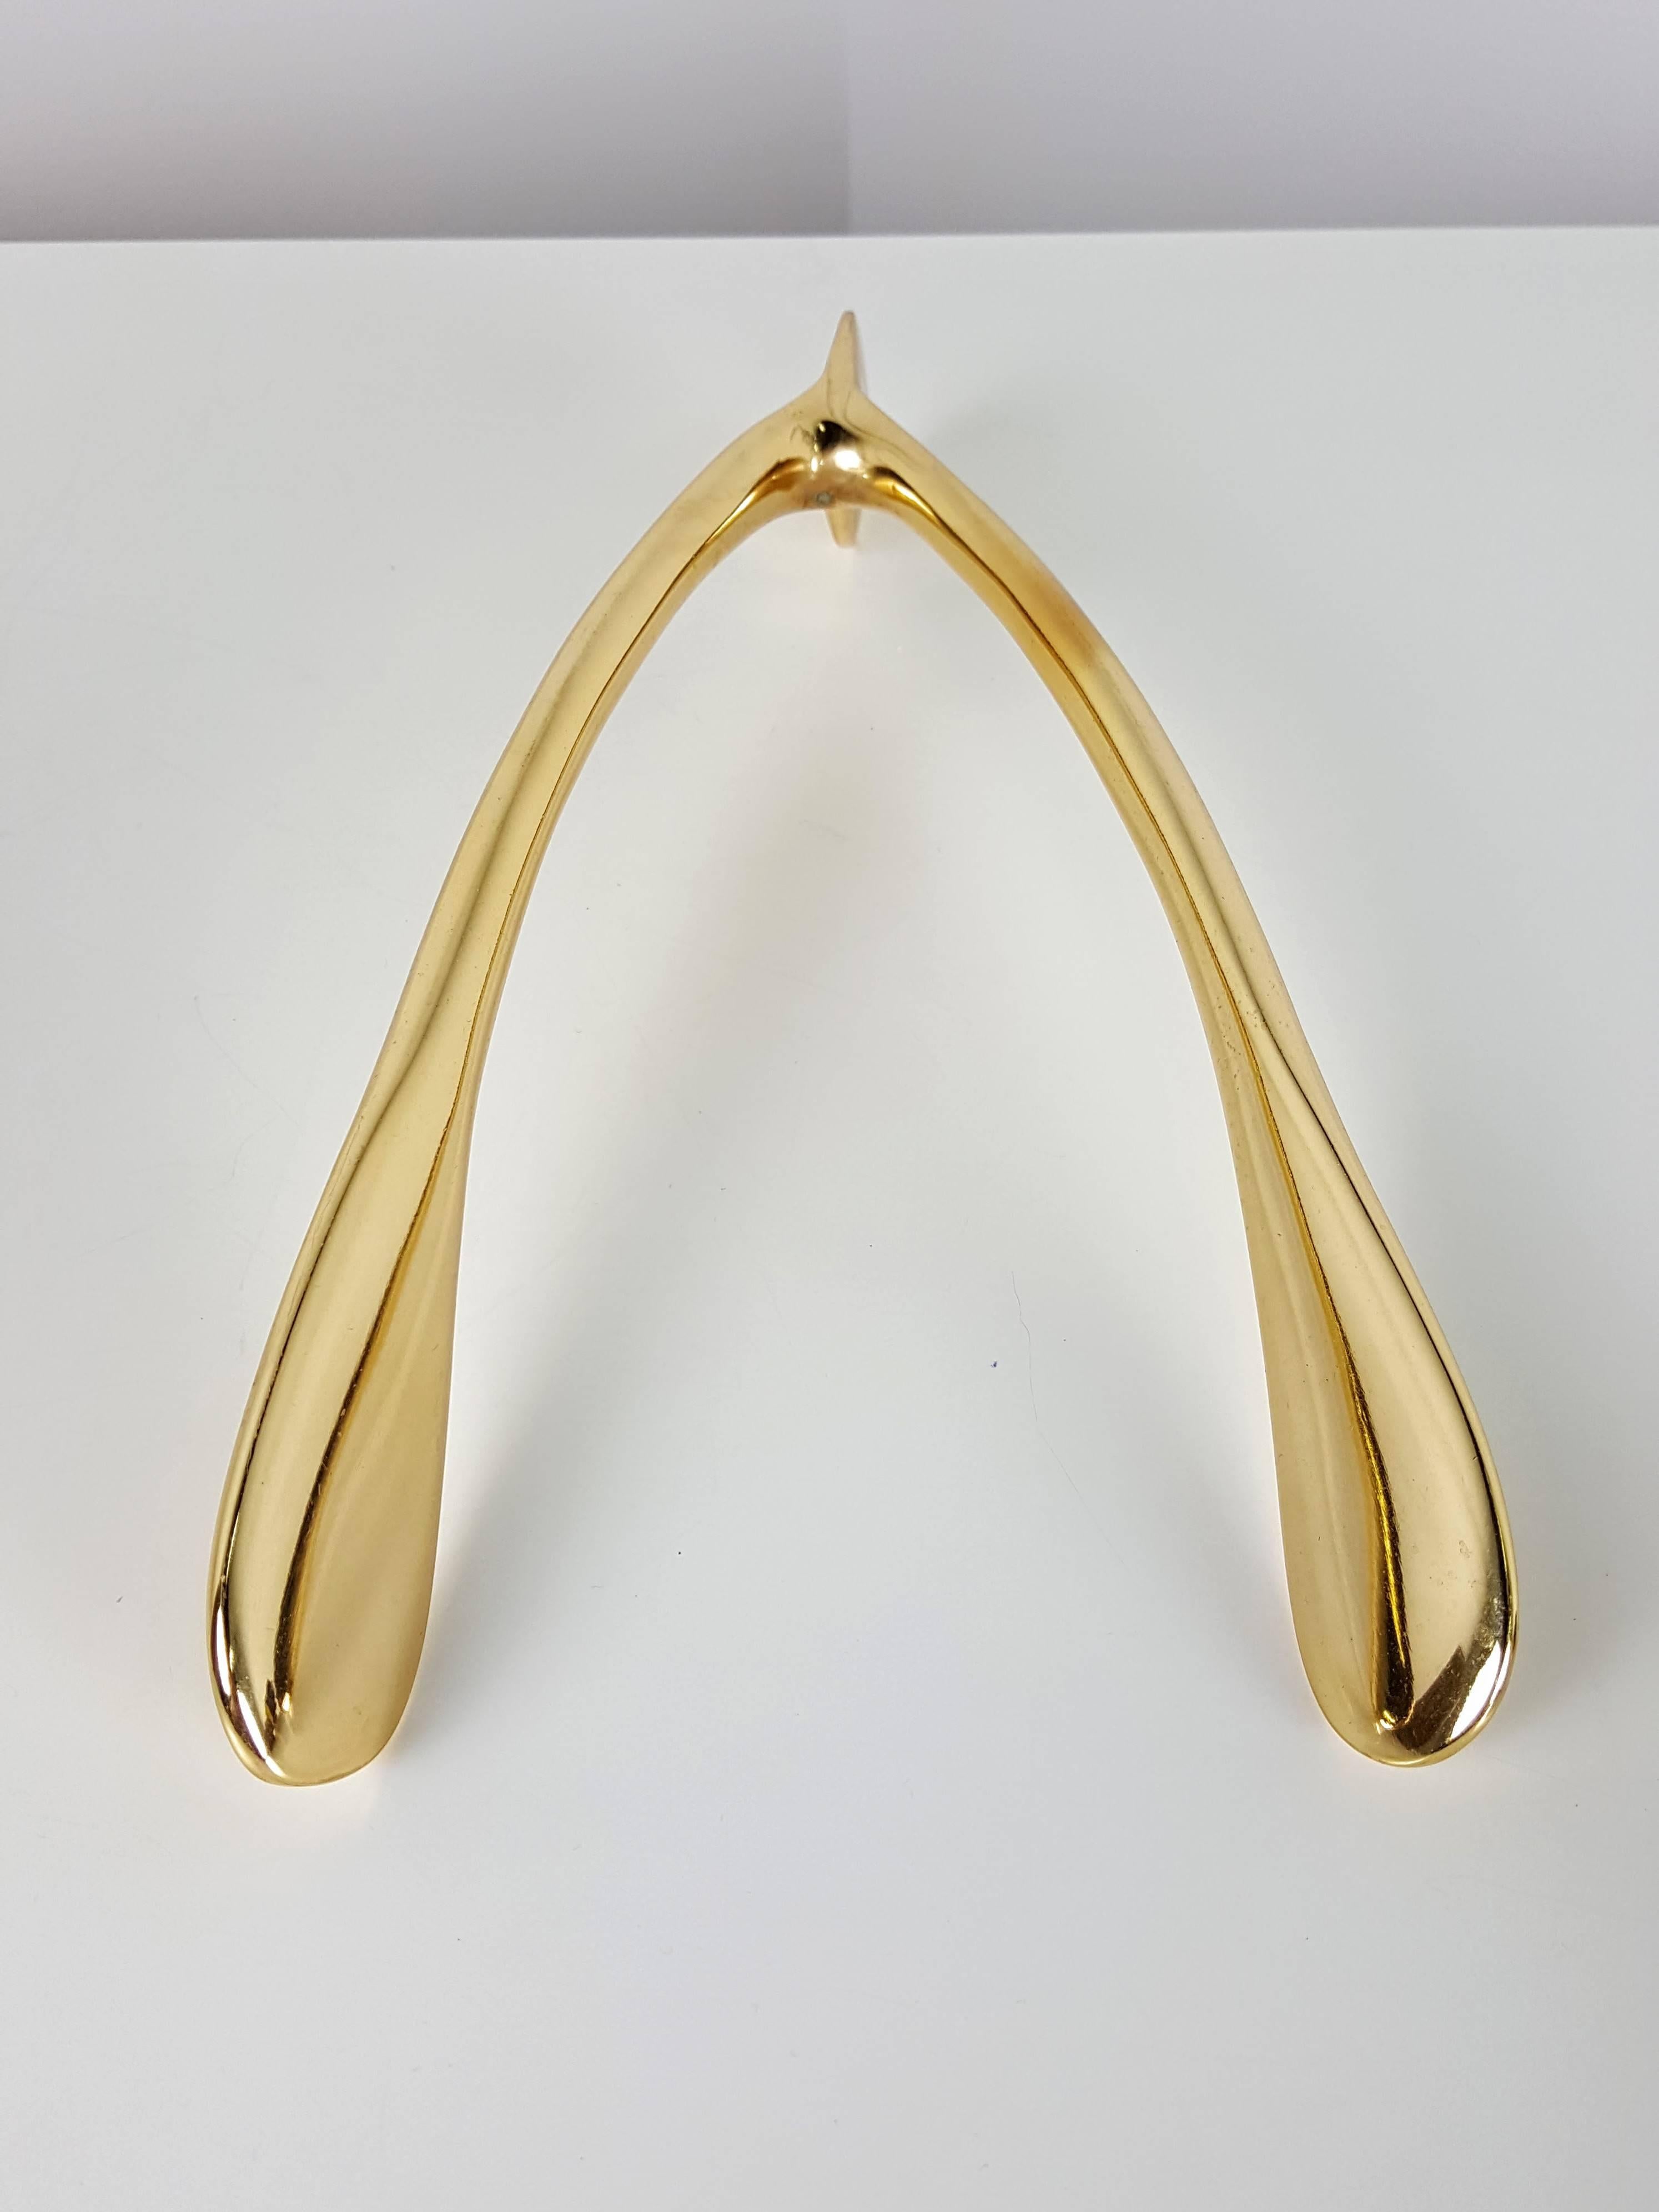 Contemporary Massive Anatomical Brass Wishbone Objet or Paperweight